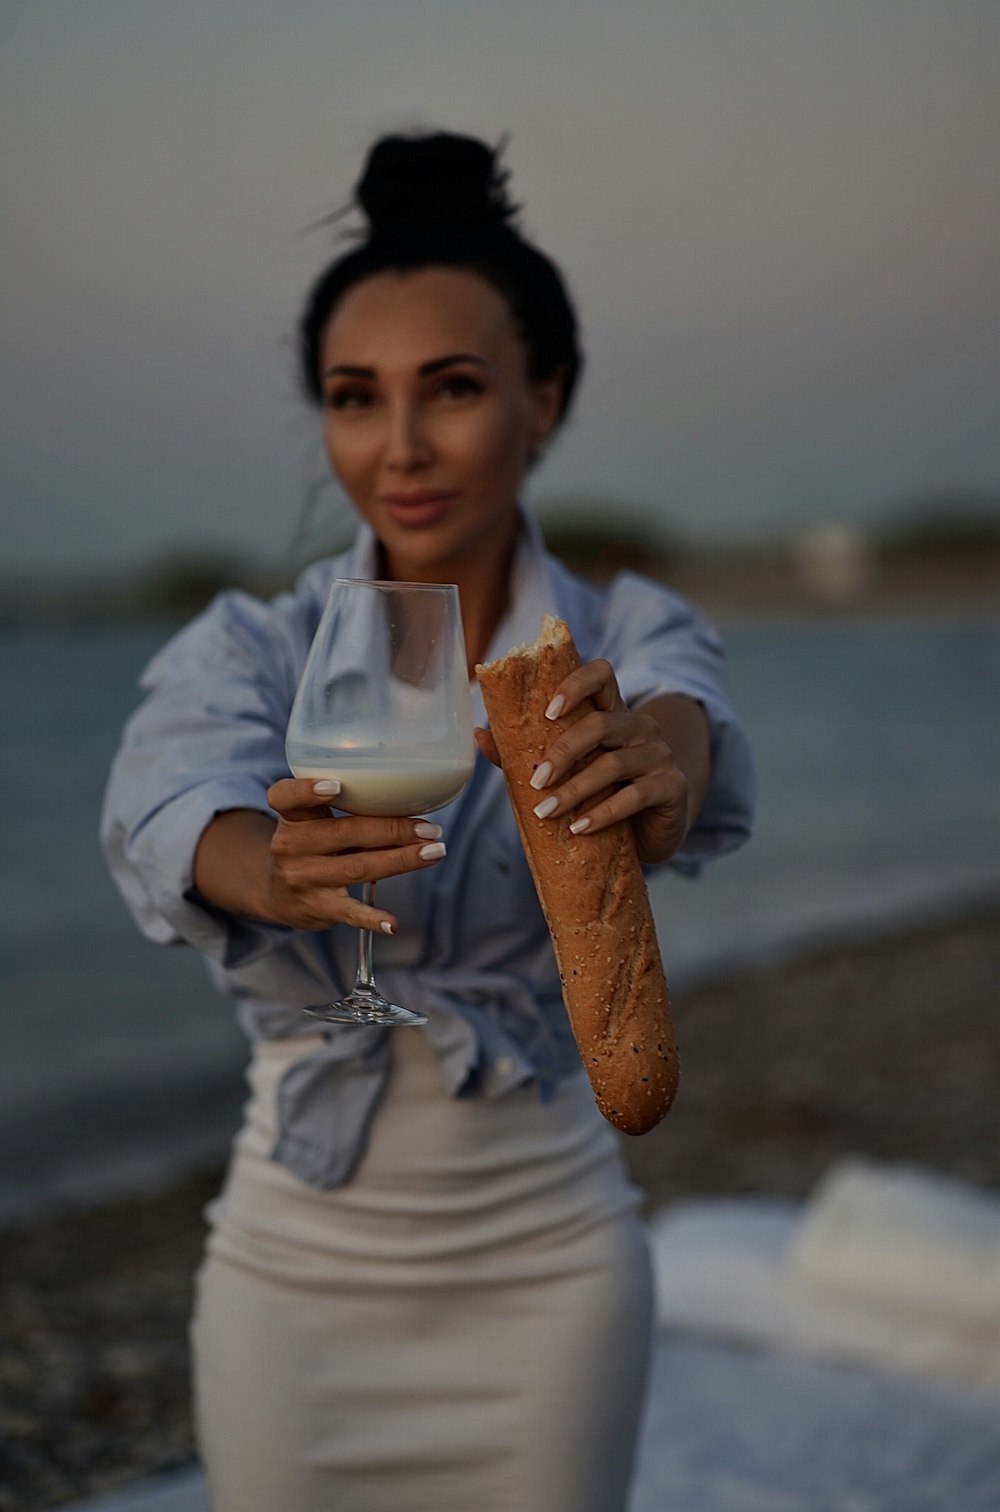 a person holding a glass of wine